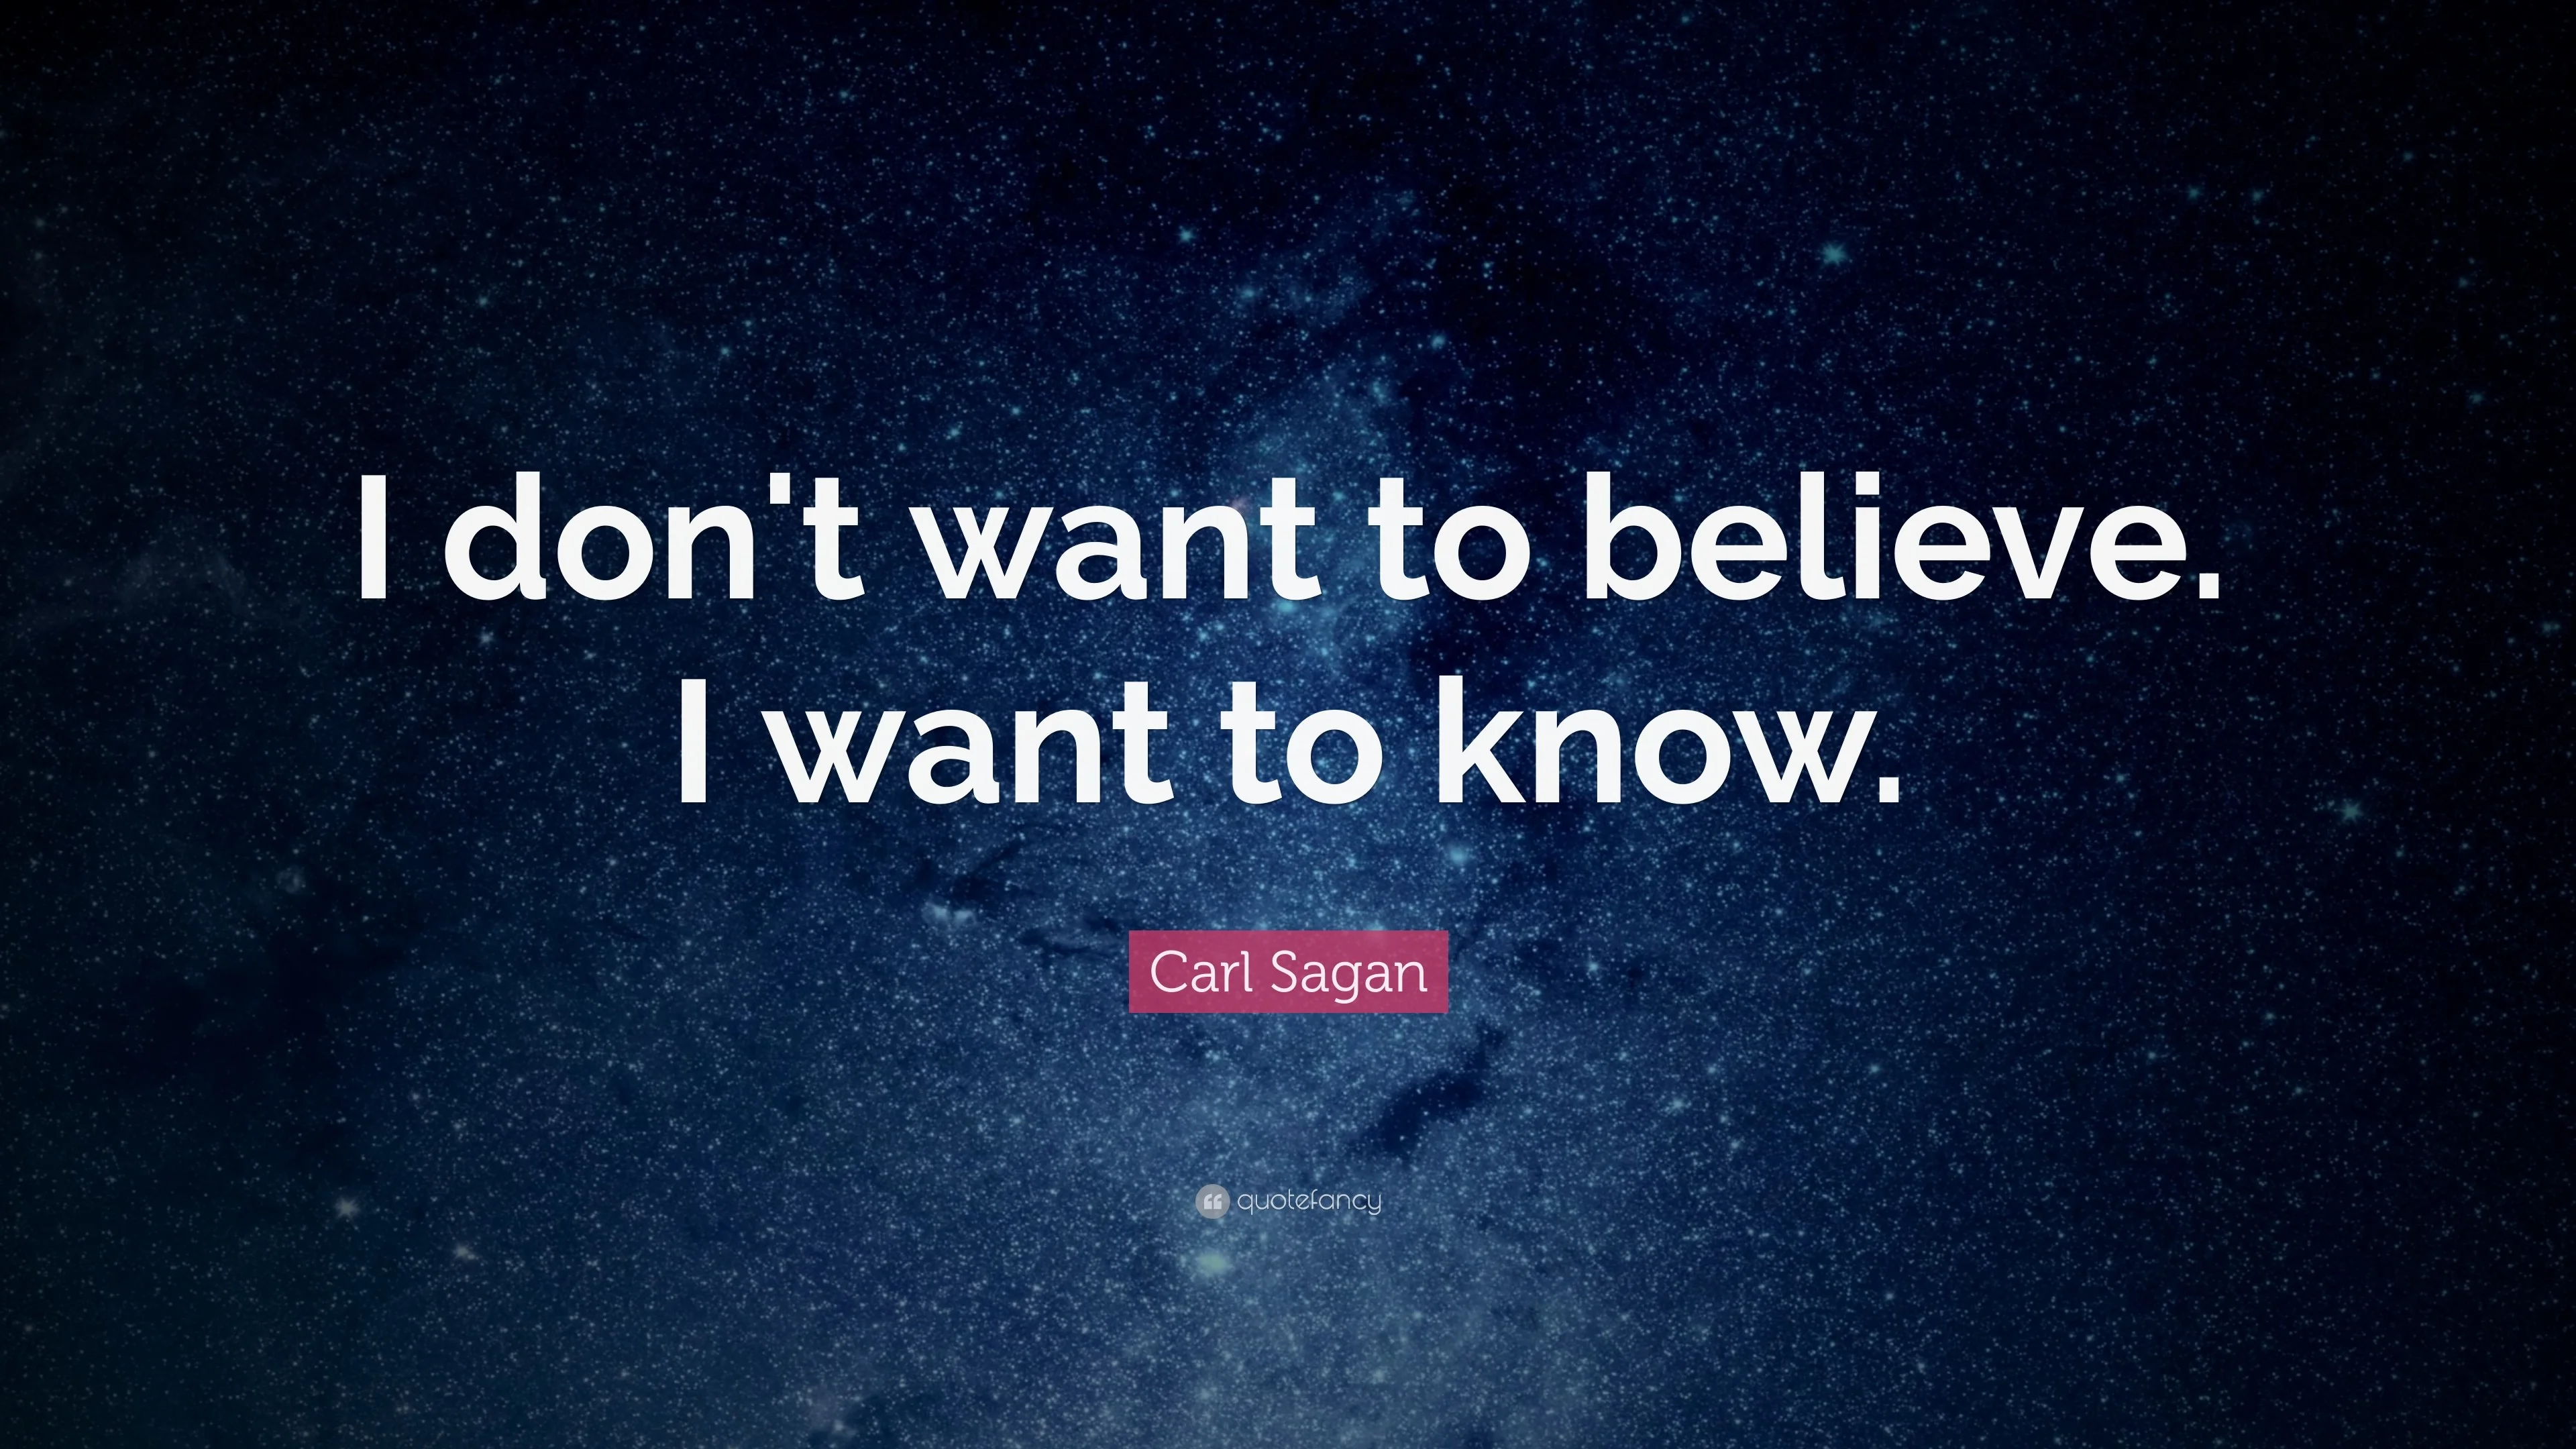 Carl sagan quote i don t want to believe i want to know 18